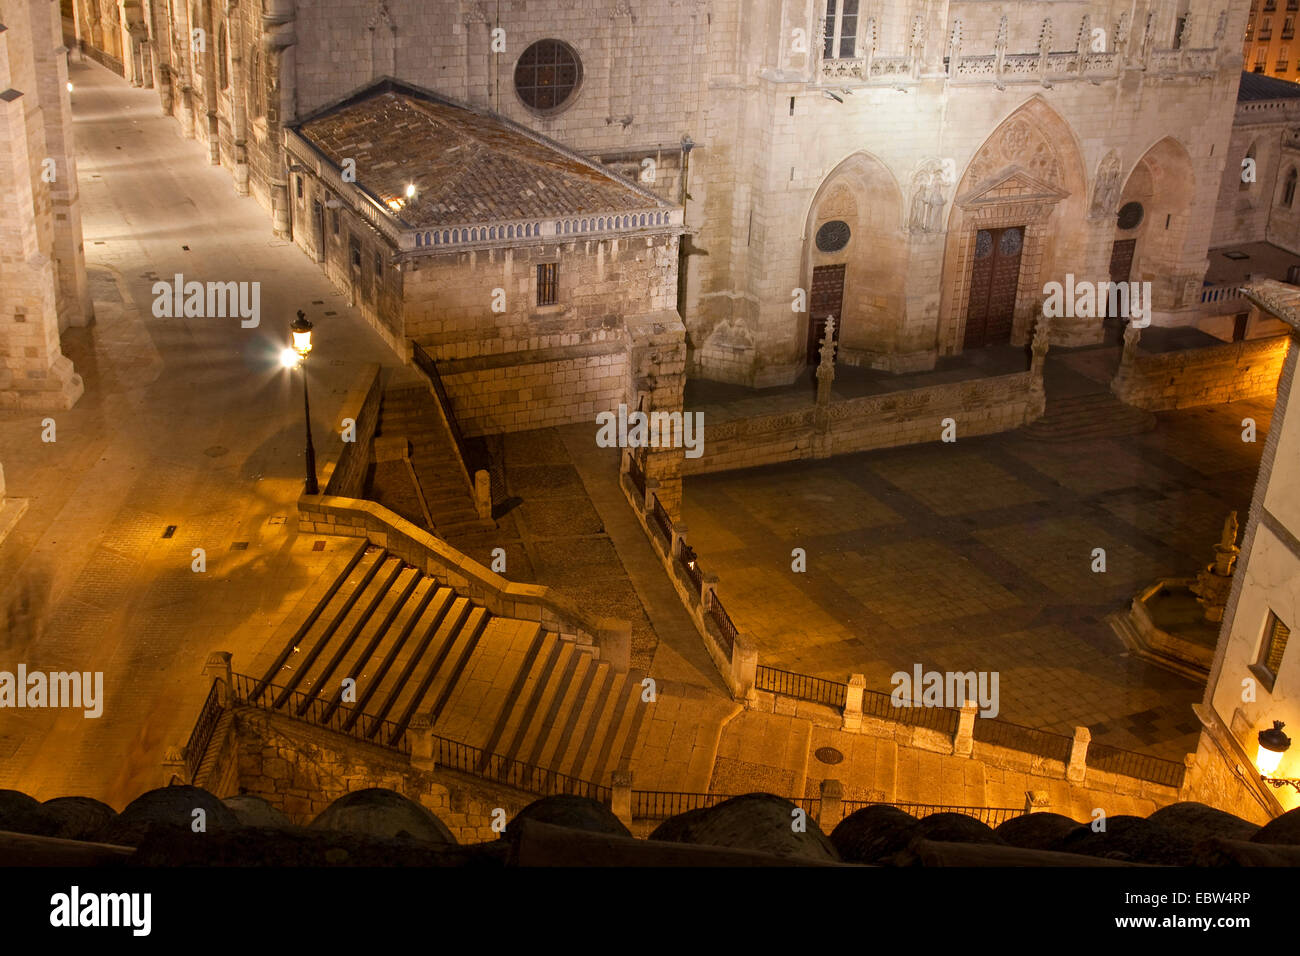 nightly view from above on the deserted cathedral square lit by street lights, Spain, Kastilien und Le¾n, Burgos Stock Photo